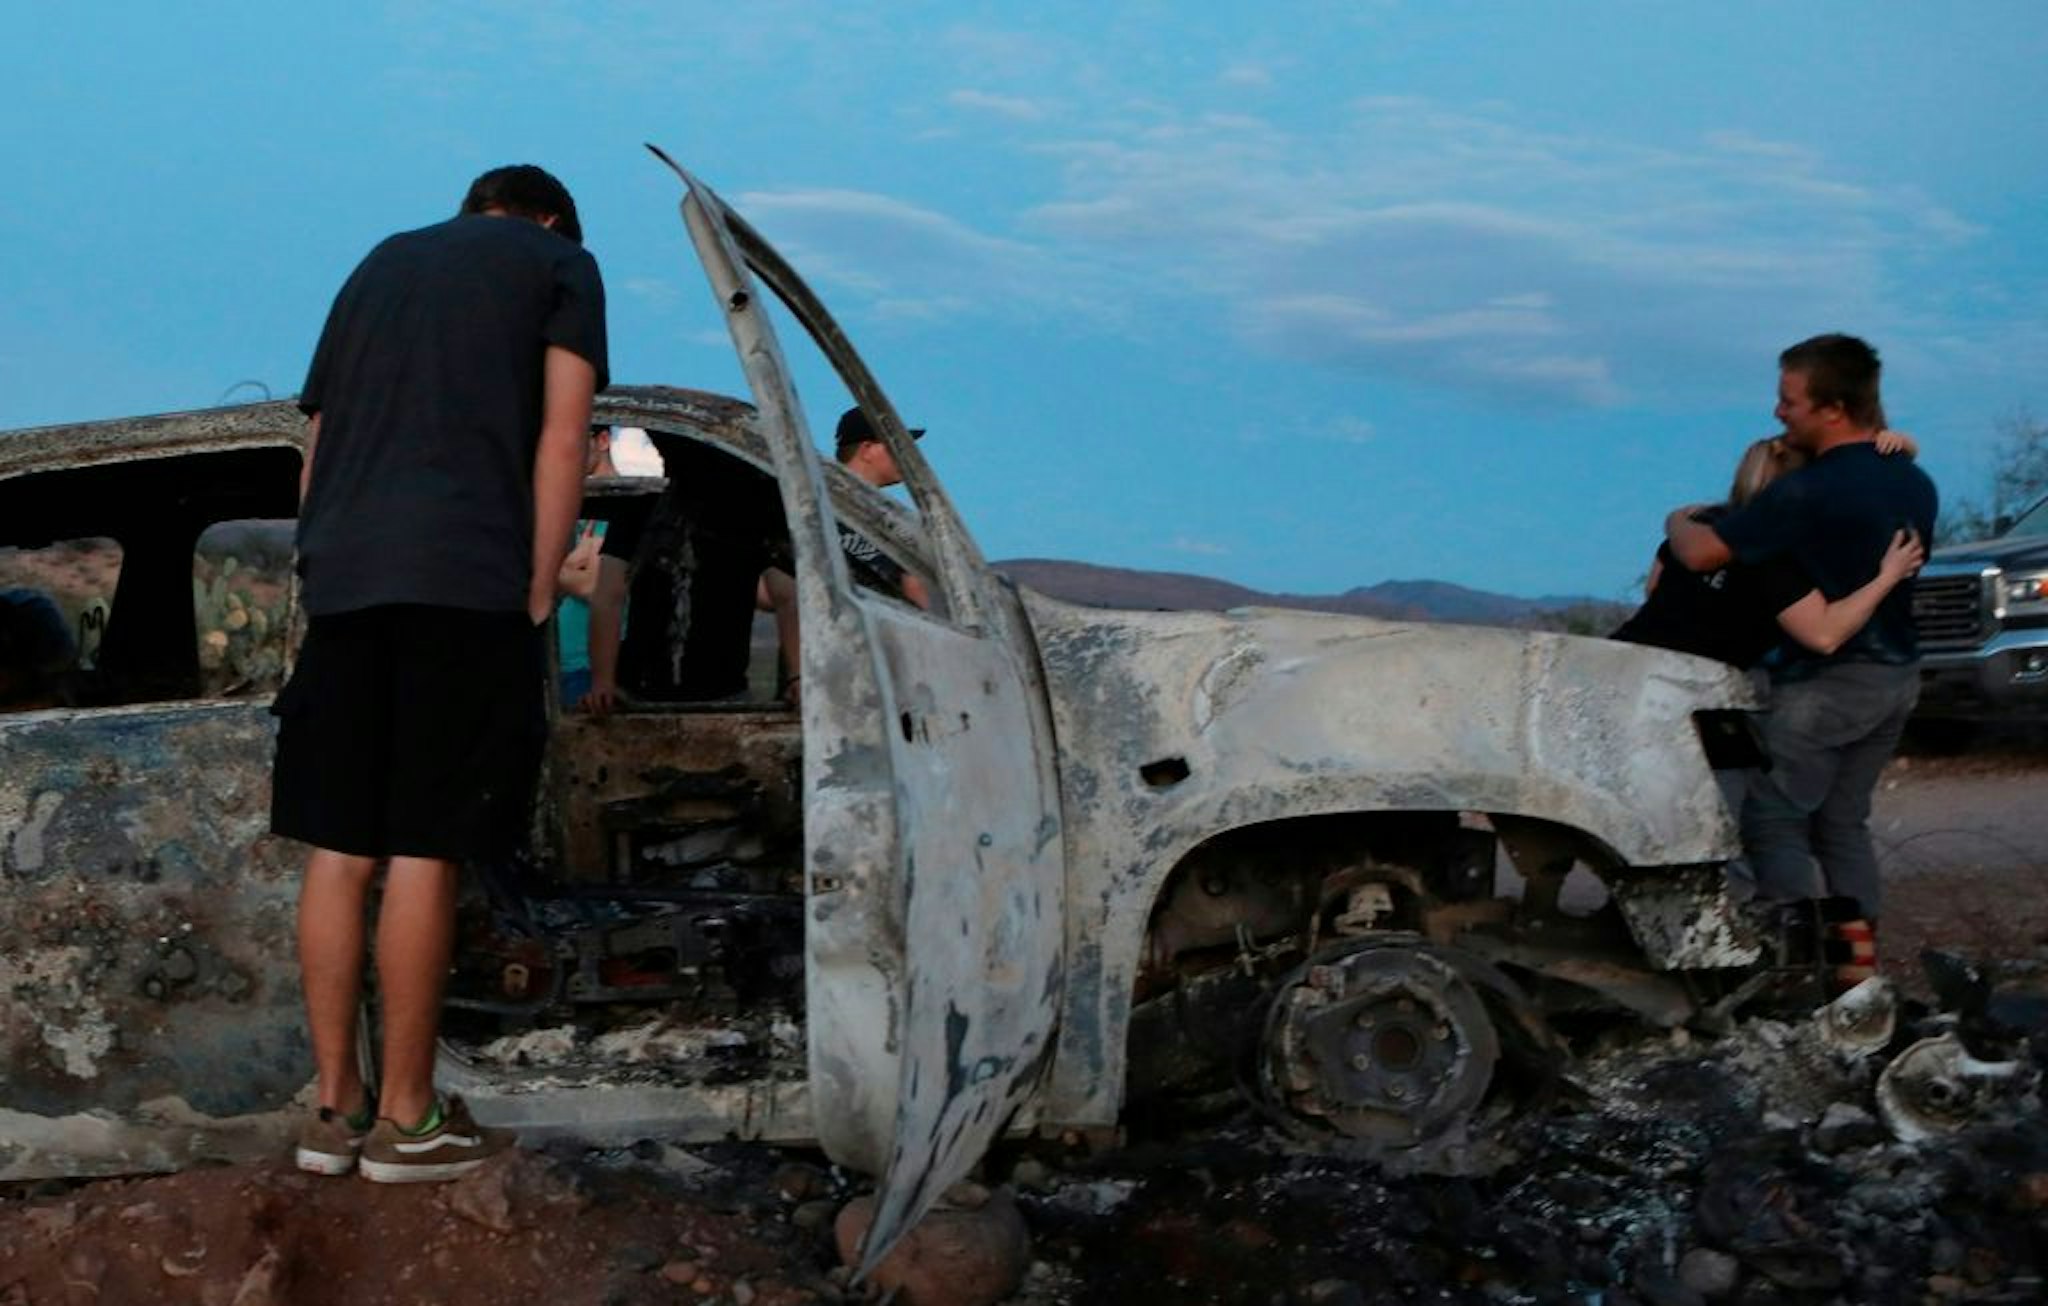 Members of the Lebaron family look at the burned car where part of the nine murdered members of the family were killed and burned during an ambush in Bavispe, Sonora mountains, Mexico, on November 5, 2019. - US President Donald Trump offered on November 5 to help Mexico "wage war" on its cartels after three women and six children from an American Mormon community were murdered in an area notorious for drug traffickers. (Photo by HERIKA MARTINEZ / AFP) (Photo by HERIKA MARTINEZ/AFP via Getty Images)